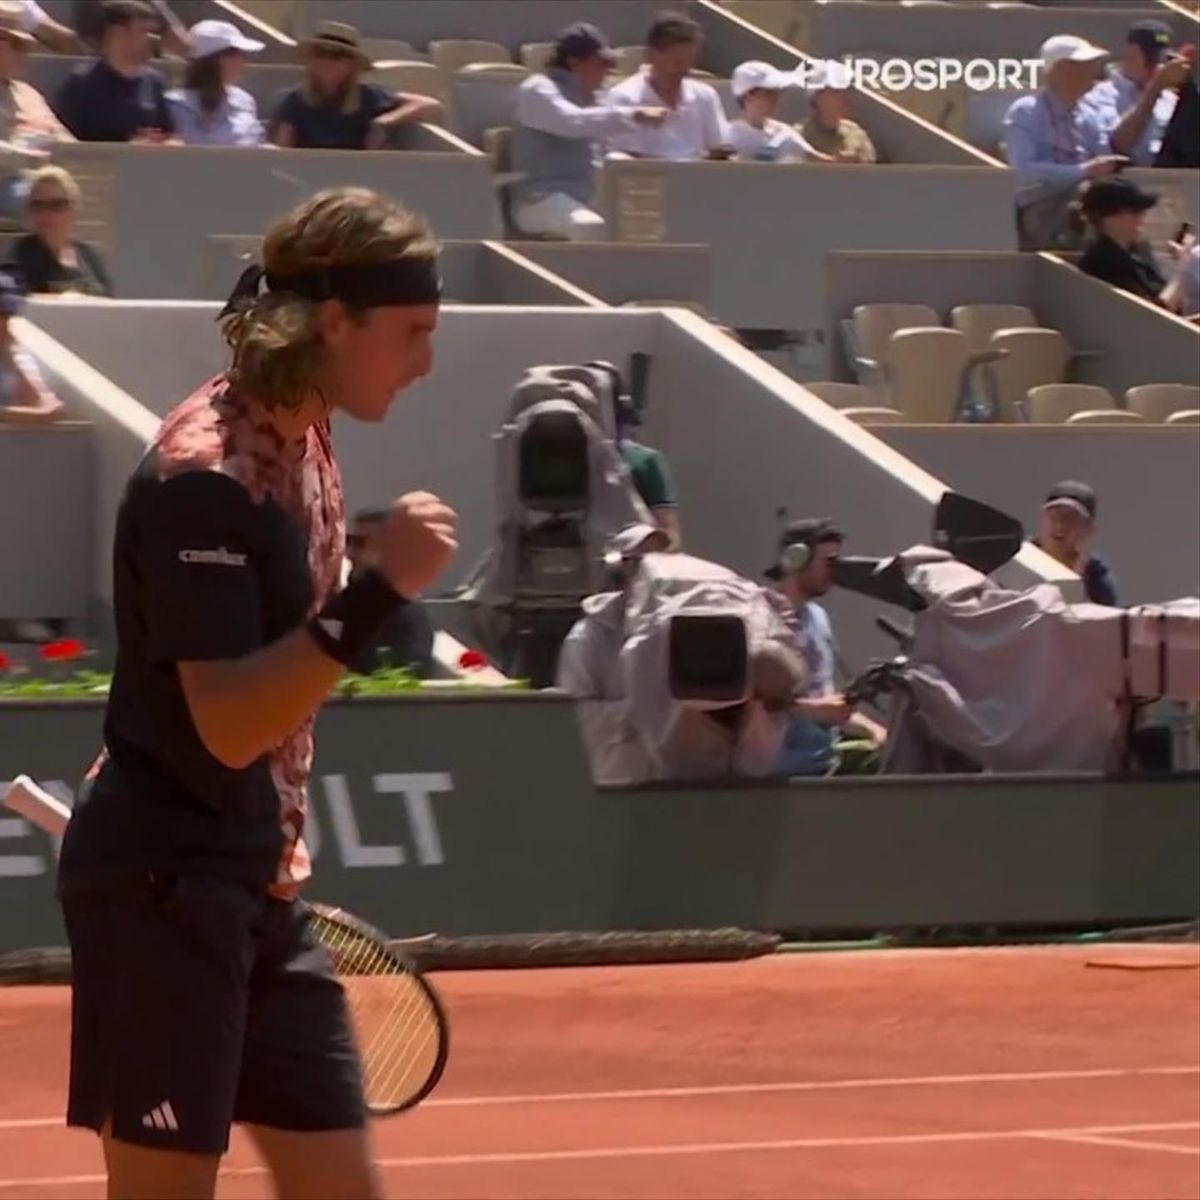 French Open 2023 Stefanos Tsitsipas roars back from 5-3 down to win first set against Jiri Vesely - Tennis video